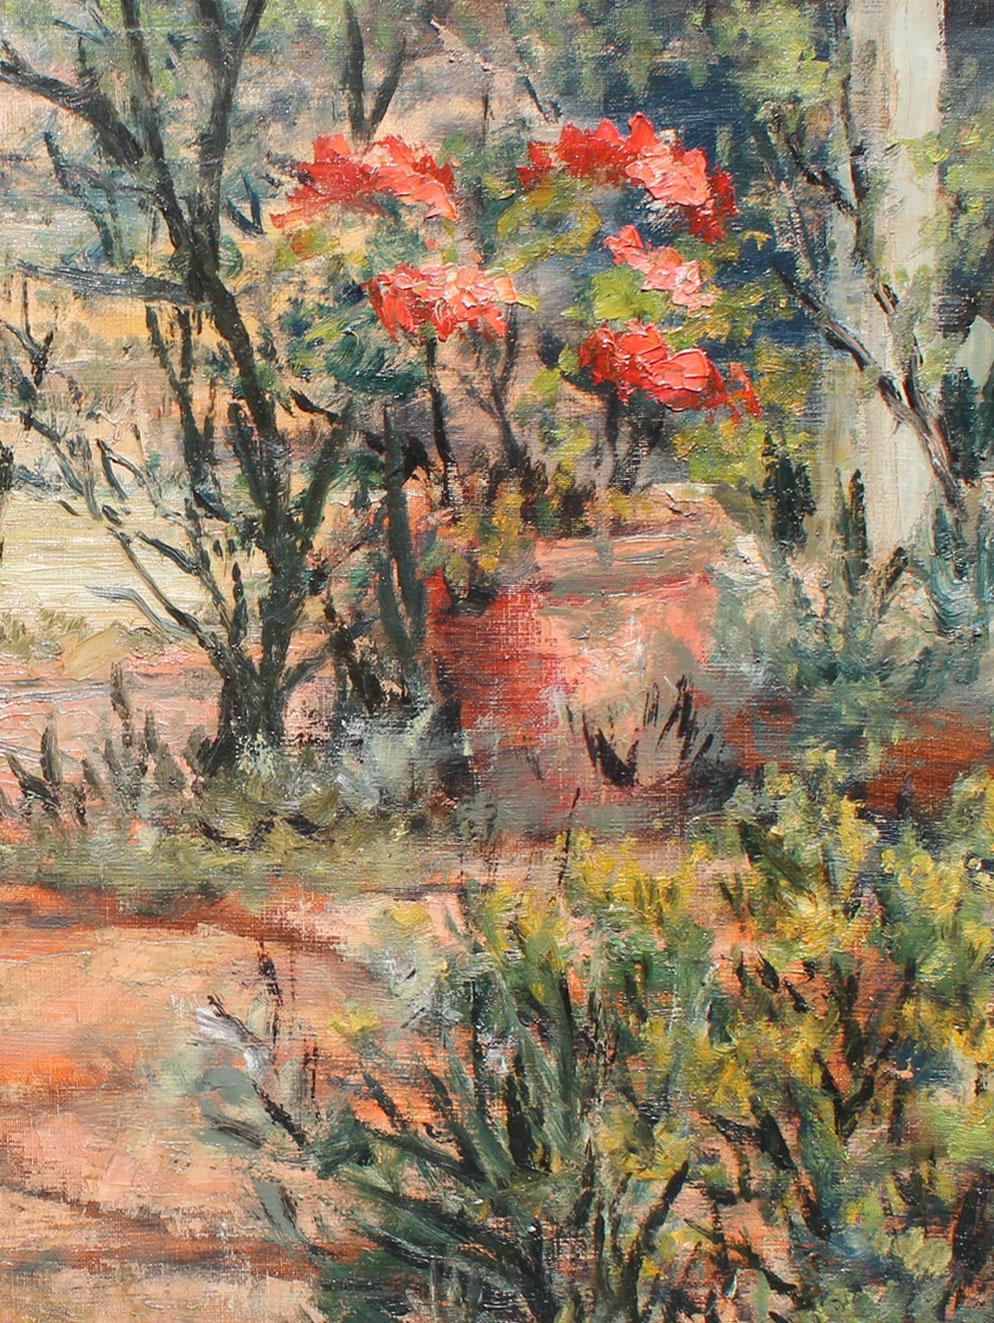 Botanical Garden - Impressionist Painting by Félix Tisot